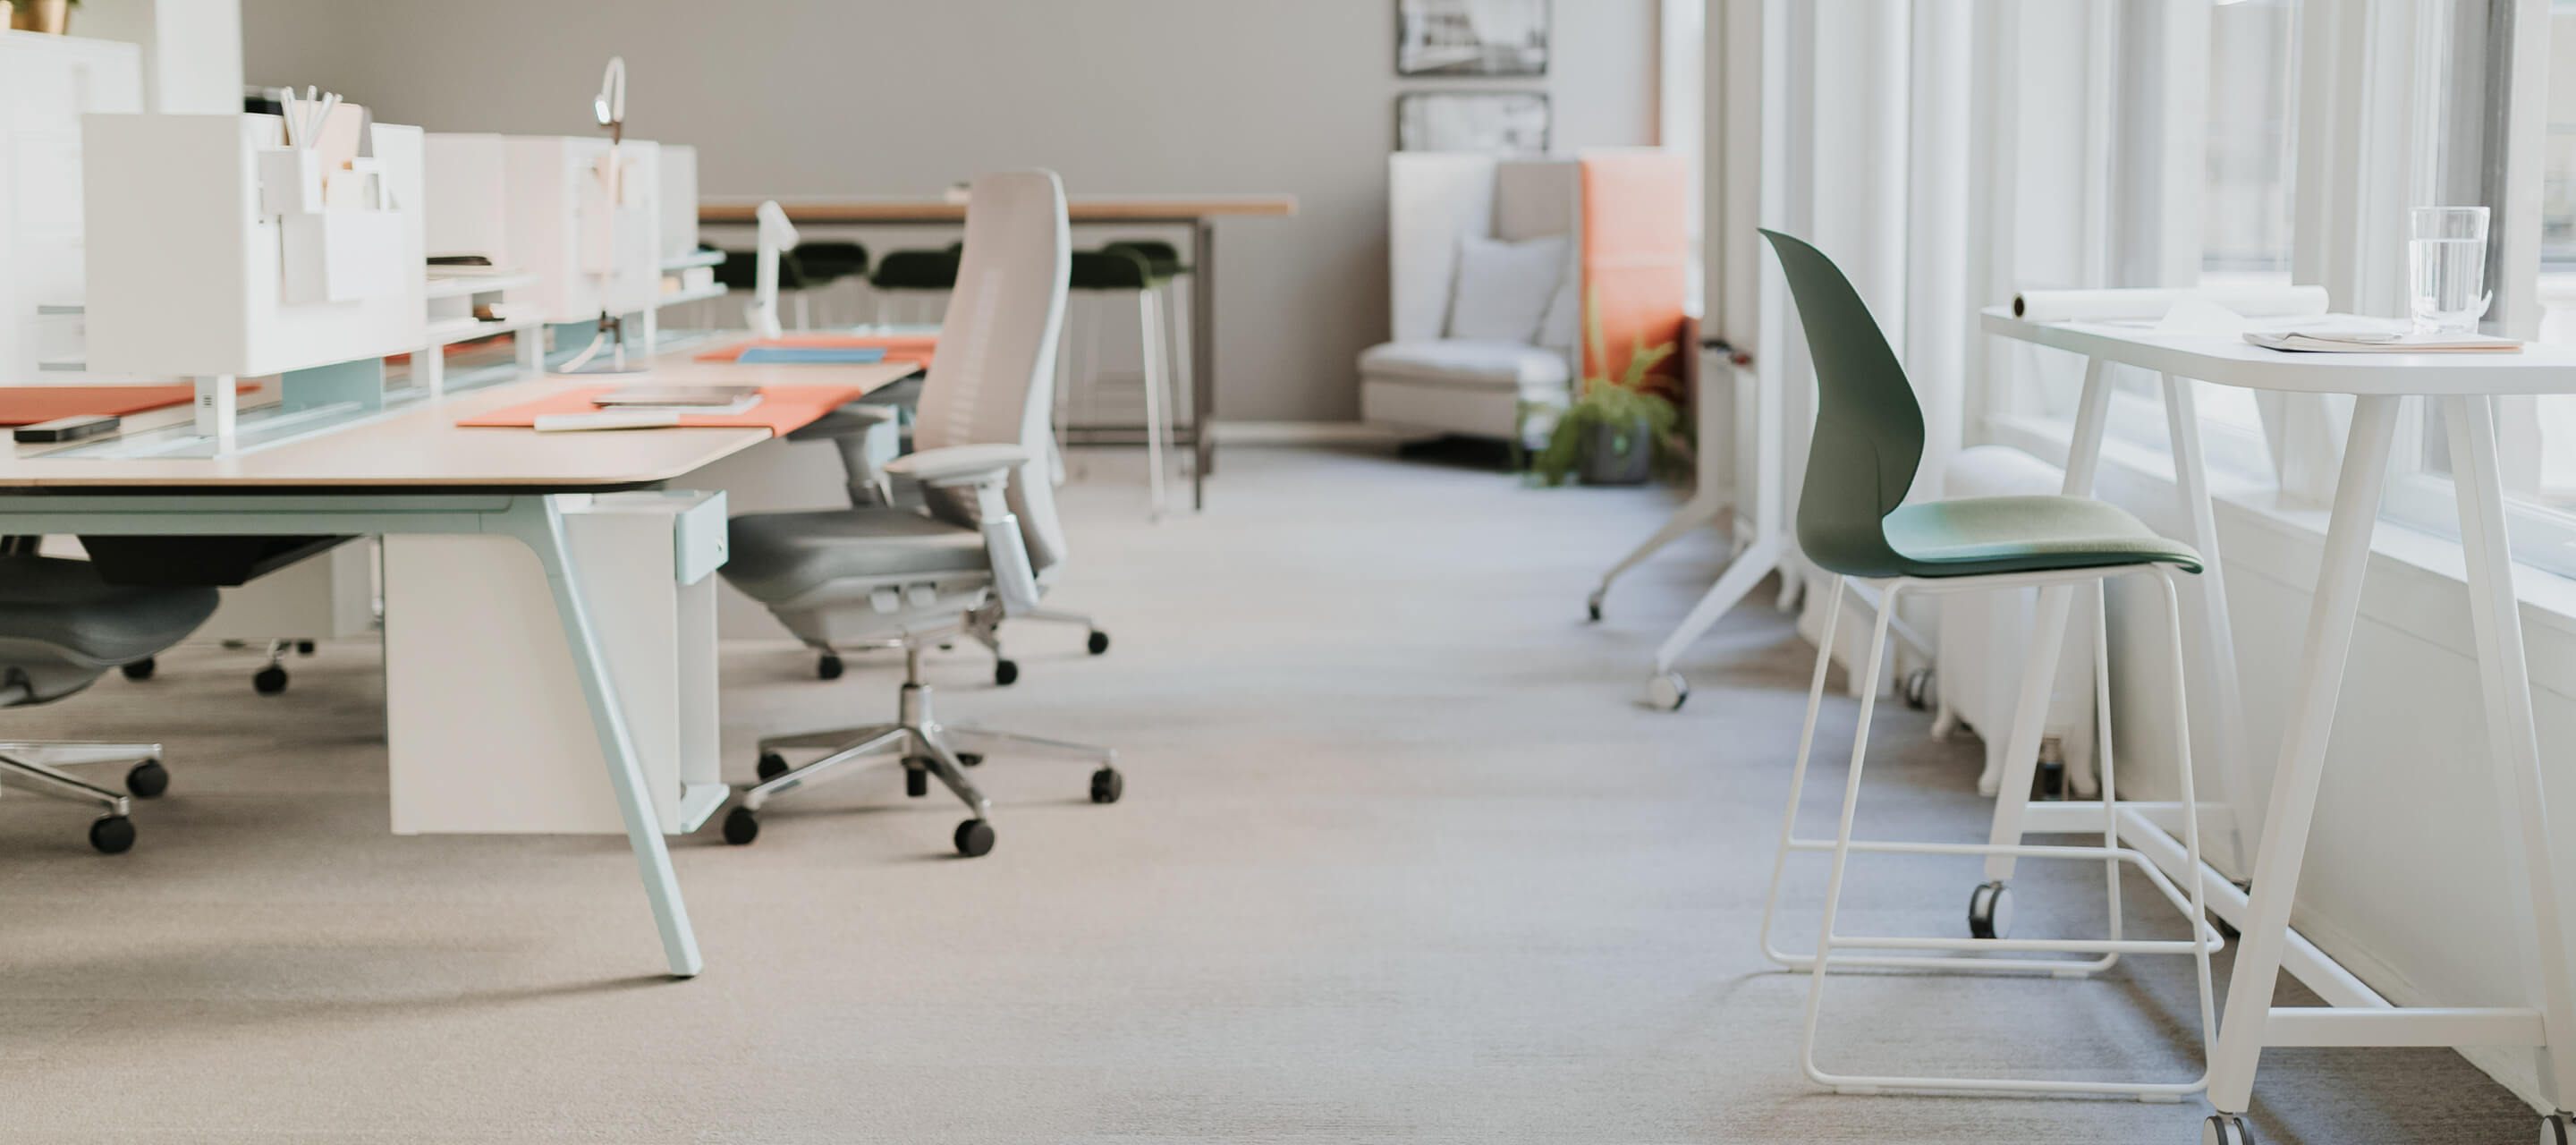 Individual workspace featuring a gray fern office chair  and maari chair with popup table